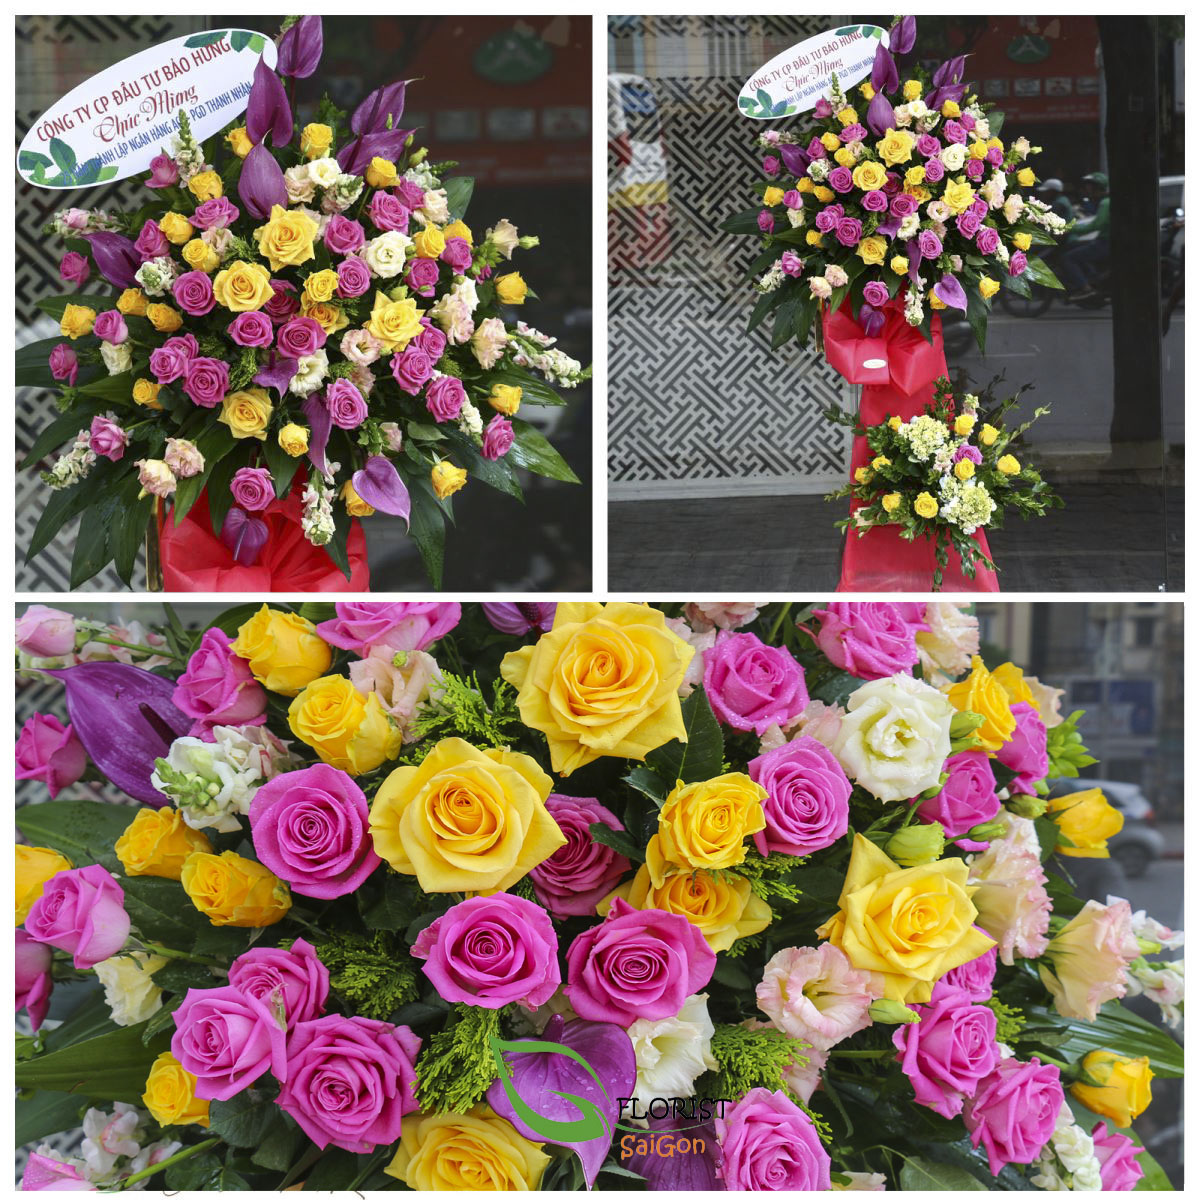 Opening ceremony flower stand in Hochiminh city